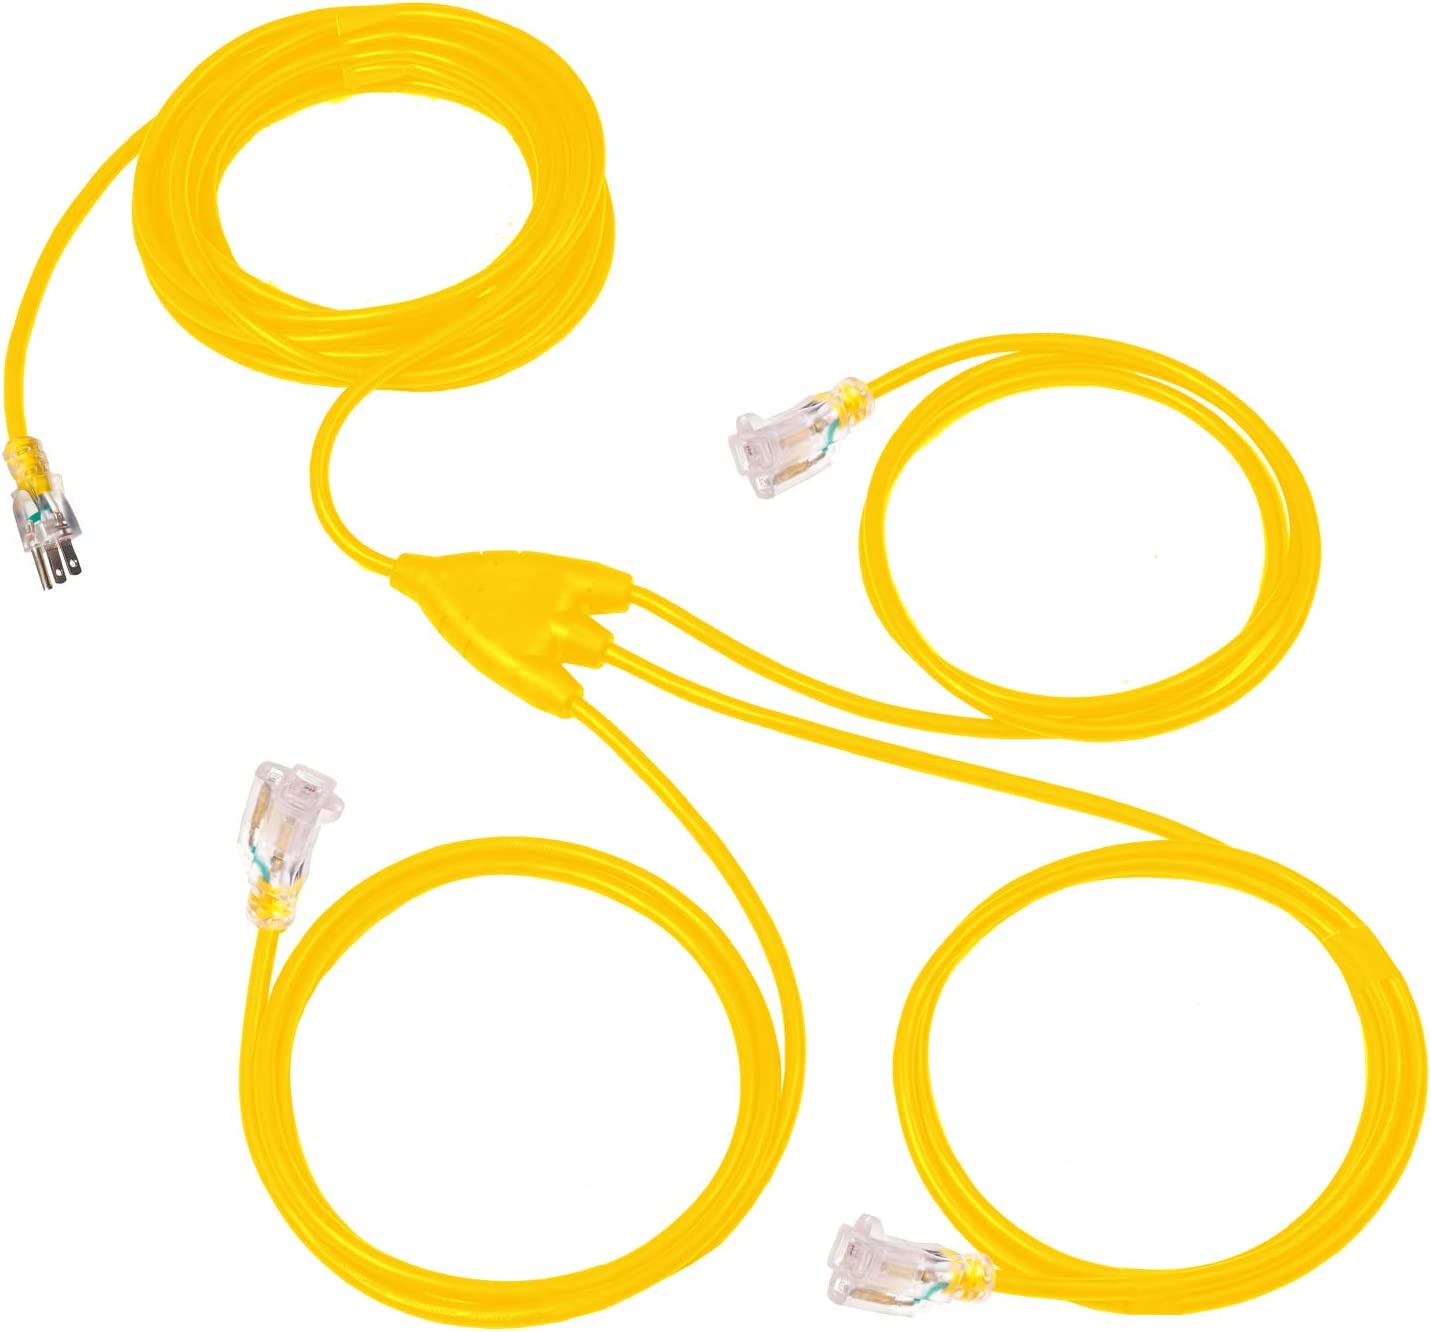 1 to 3 Extension Cord Splitter - 25 Foot Yellow Power Squid-12/3 Lighted Outdoor